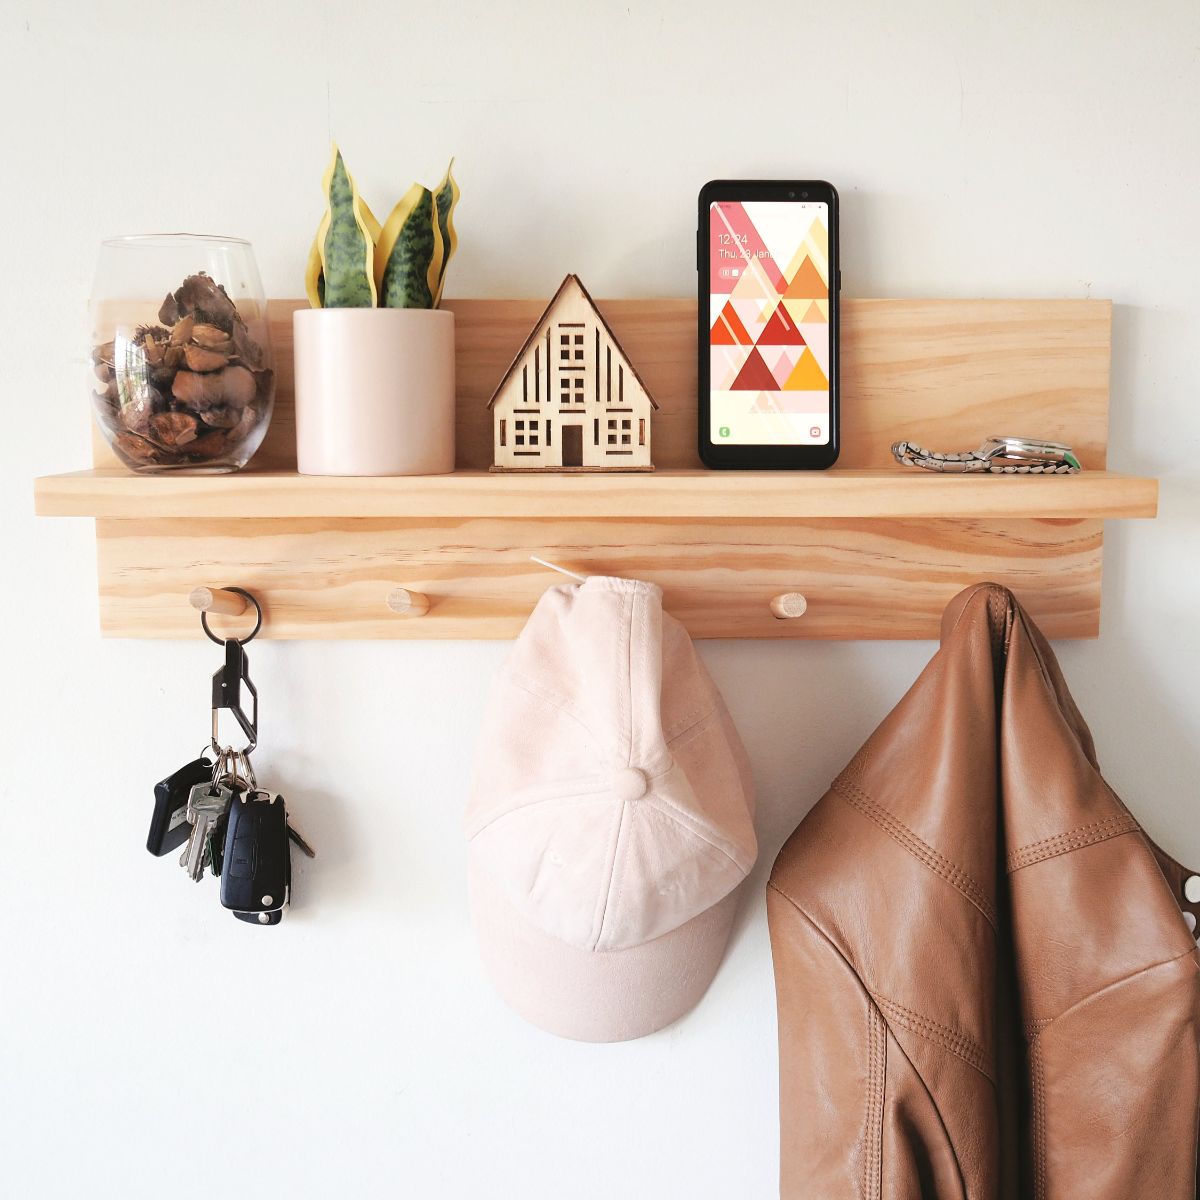 55cm Pine Wood Coat Rack Entryway Organiser Shelf with no mail holder. Front view of the shelf